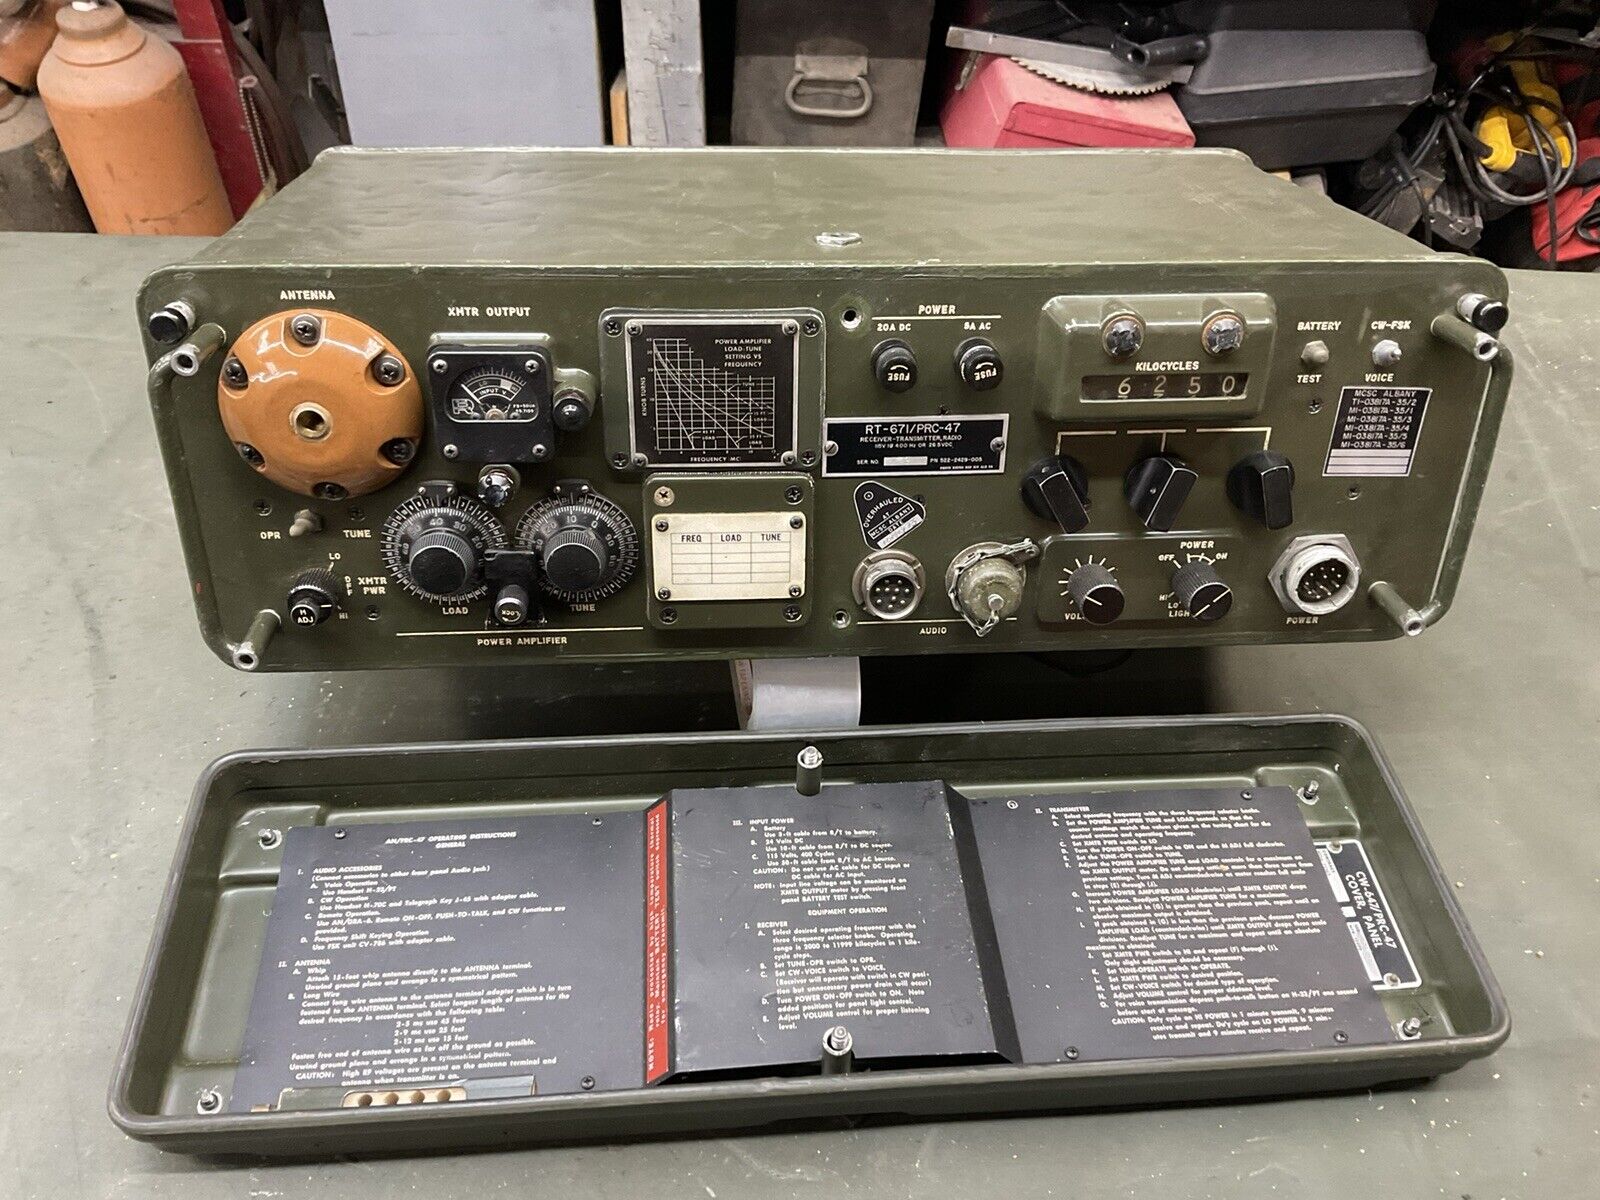 Military Radio Rt-671 Prc-47 Collins Hf Transceiver Complete